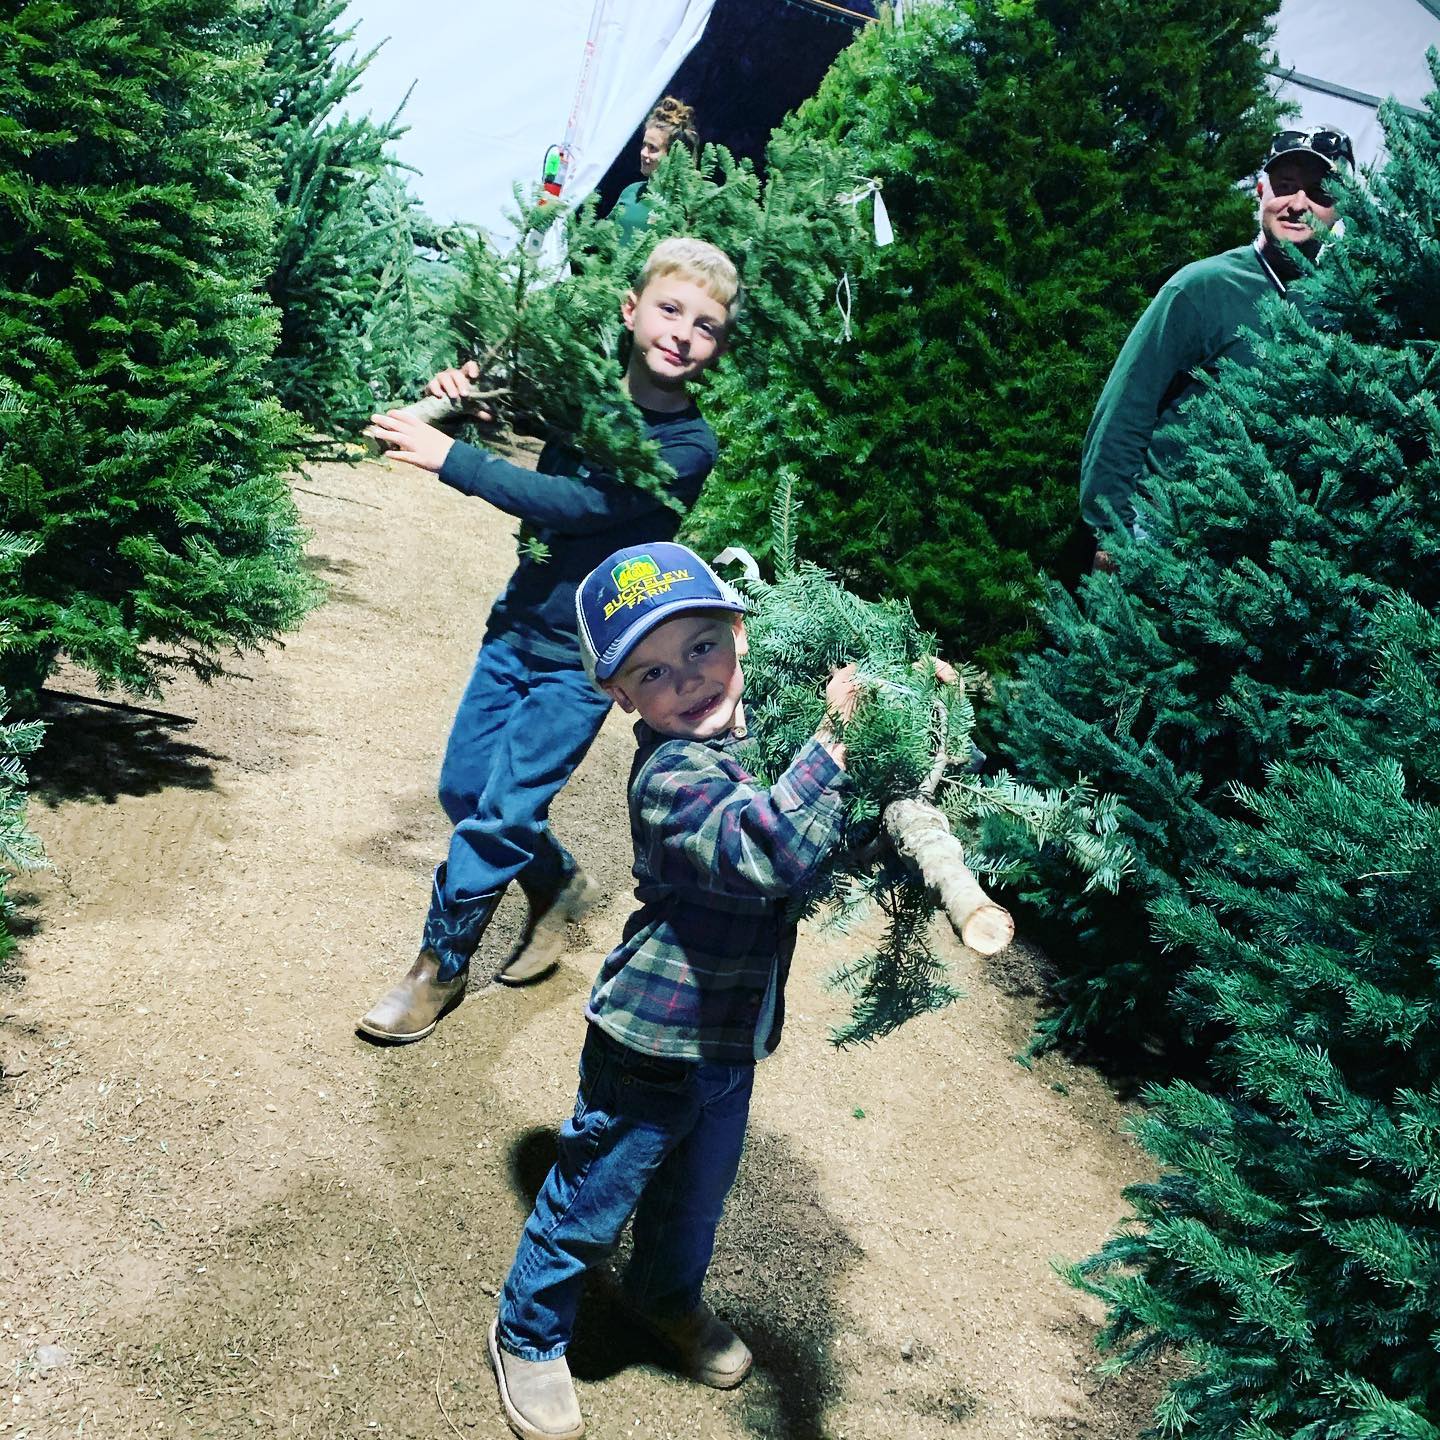 About Our Family - Buckelew Farm Christmas Trees